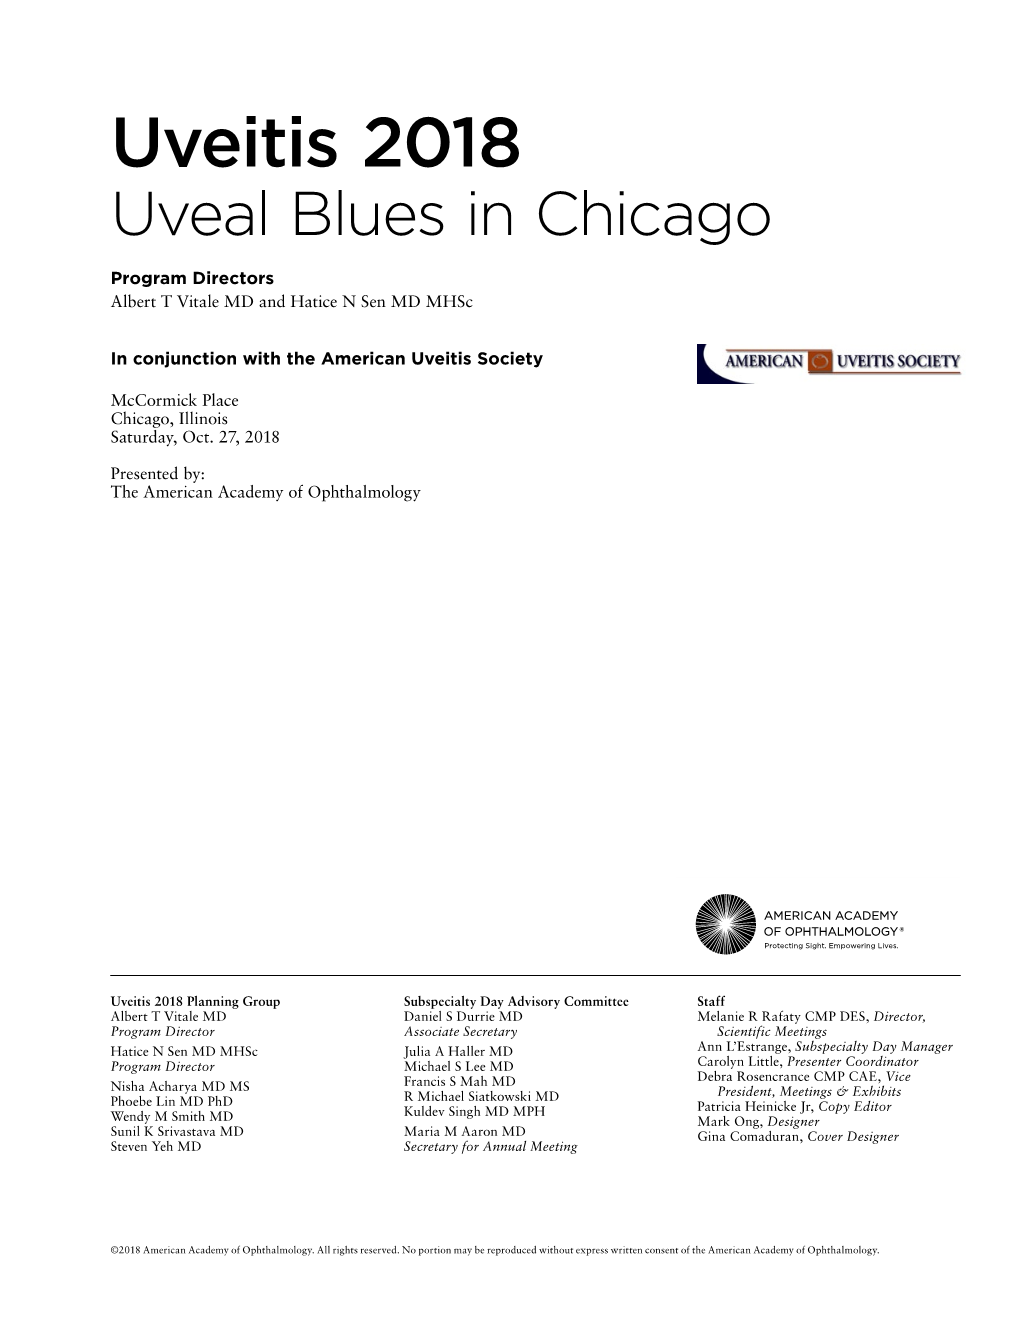 Uveitis 2018 Uveal Blues in Chicago